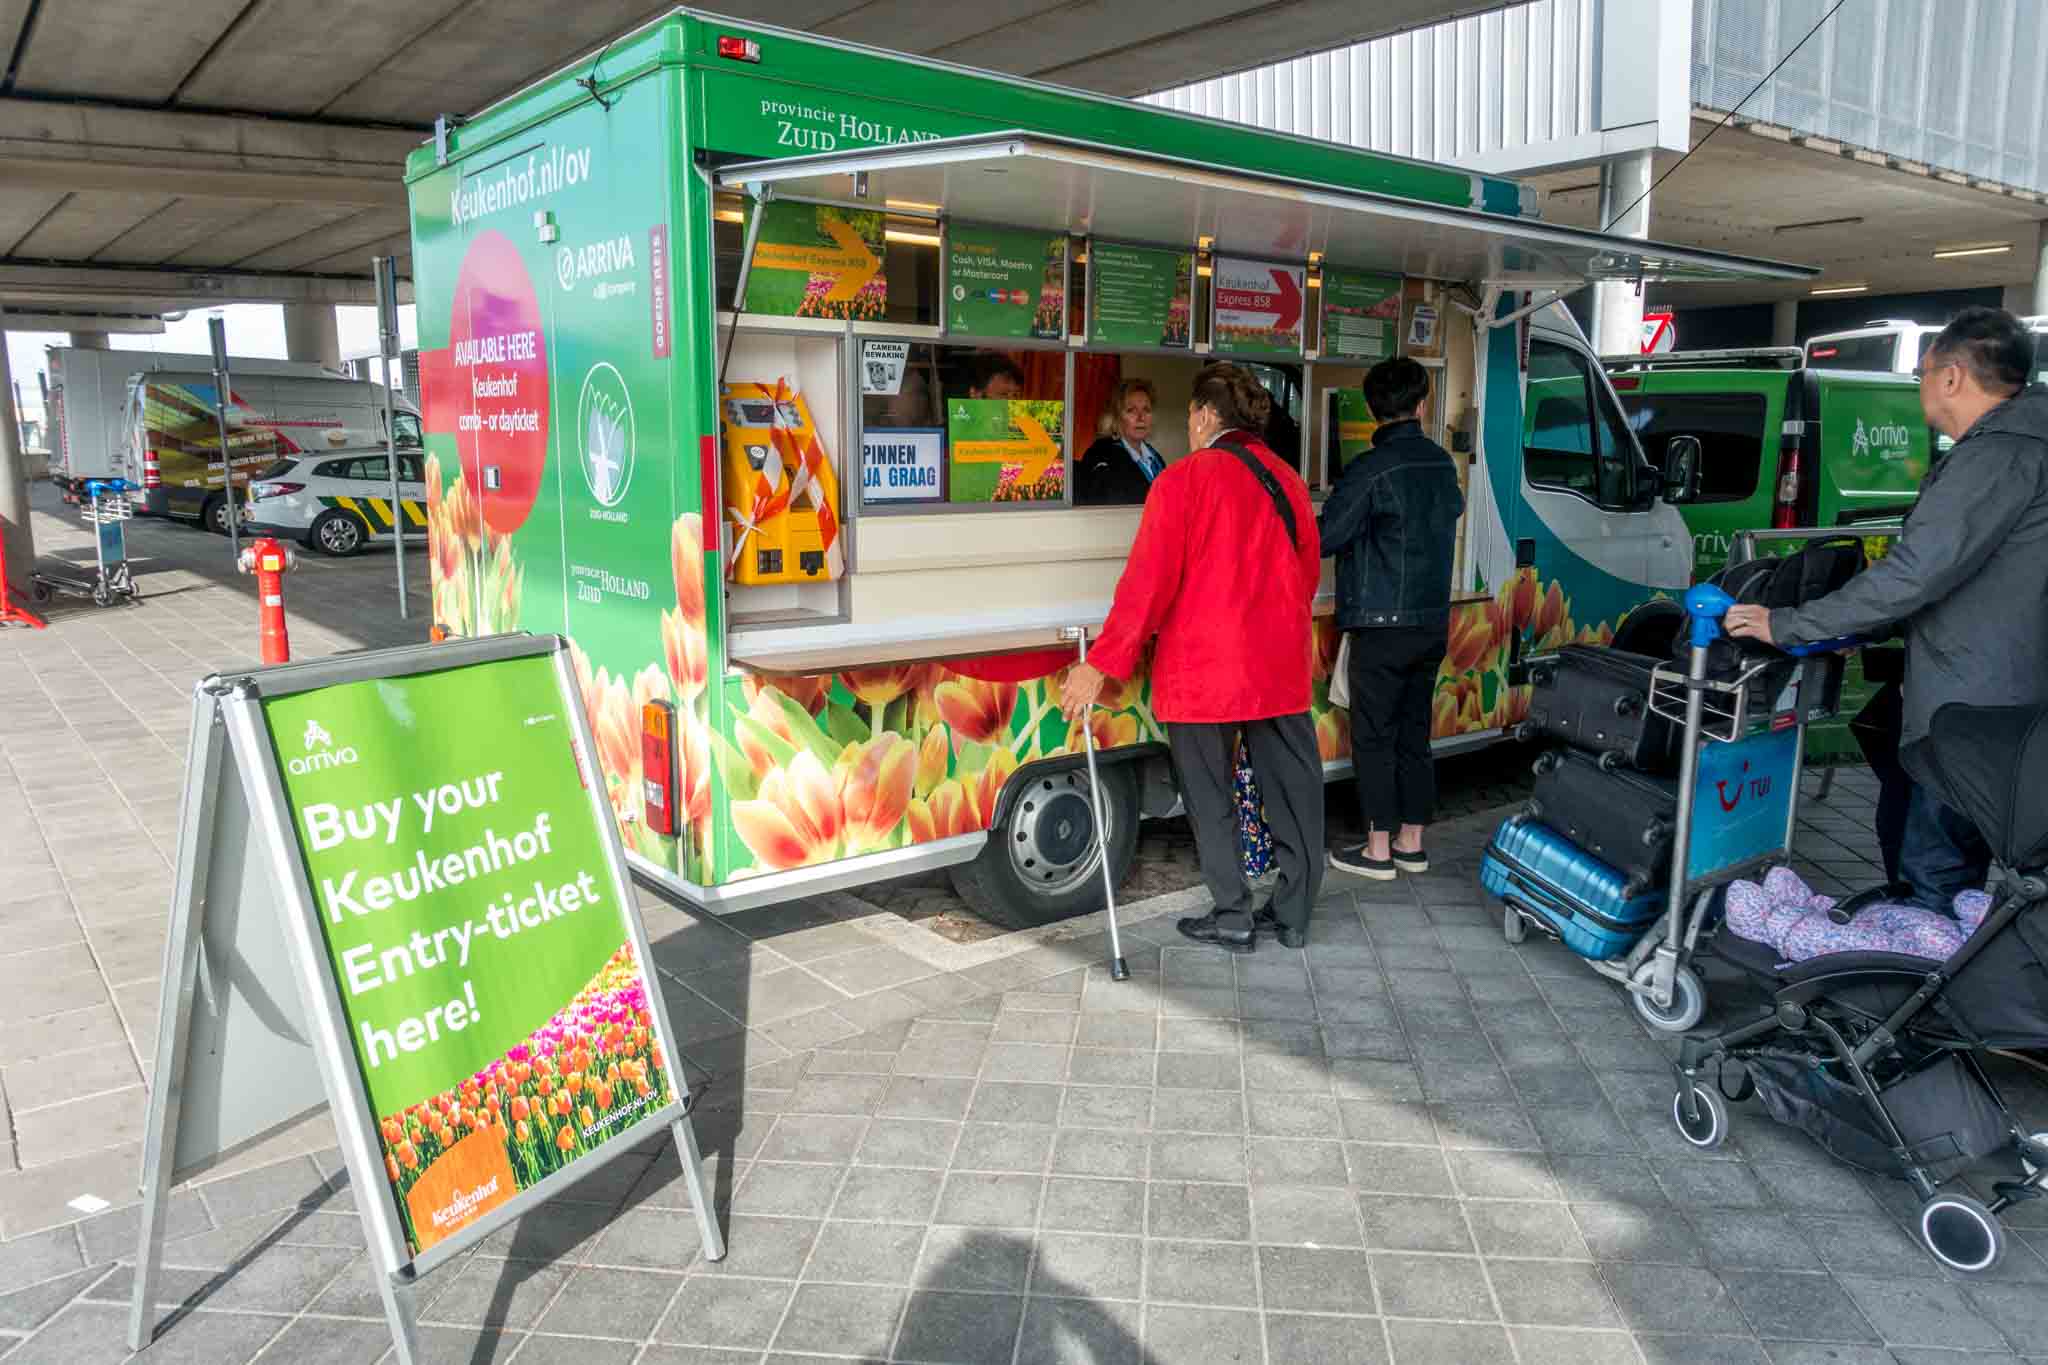 People buying bus tickets at a truck beside a sign: "Buy your Keukenhof entry ticket here"